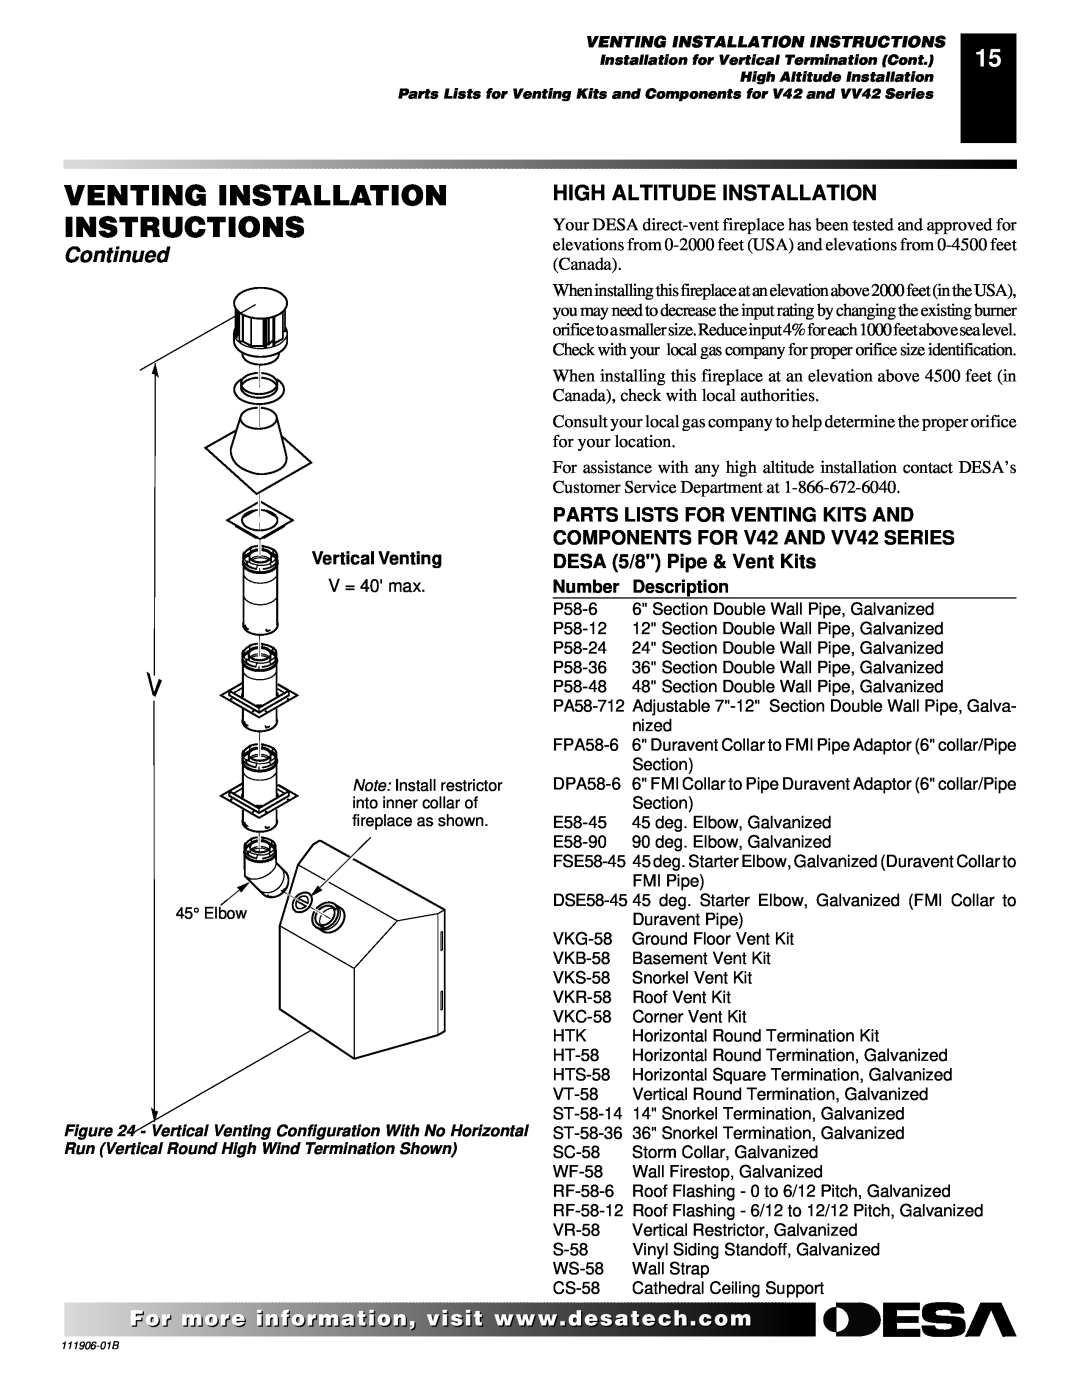 Desa CHDV42NRA Venting Installation Instructions, Continued, High Altitude Installation, Vertical Venting, Number 